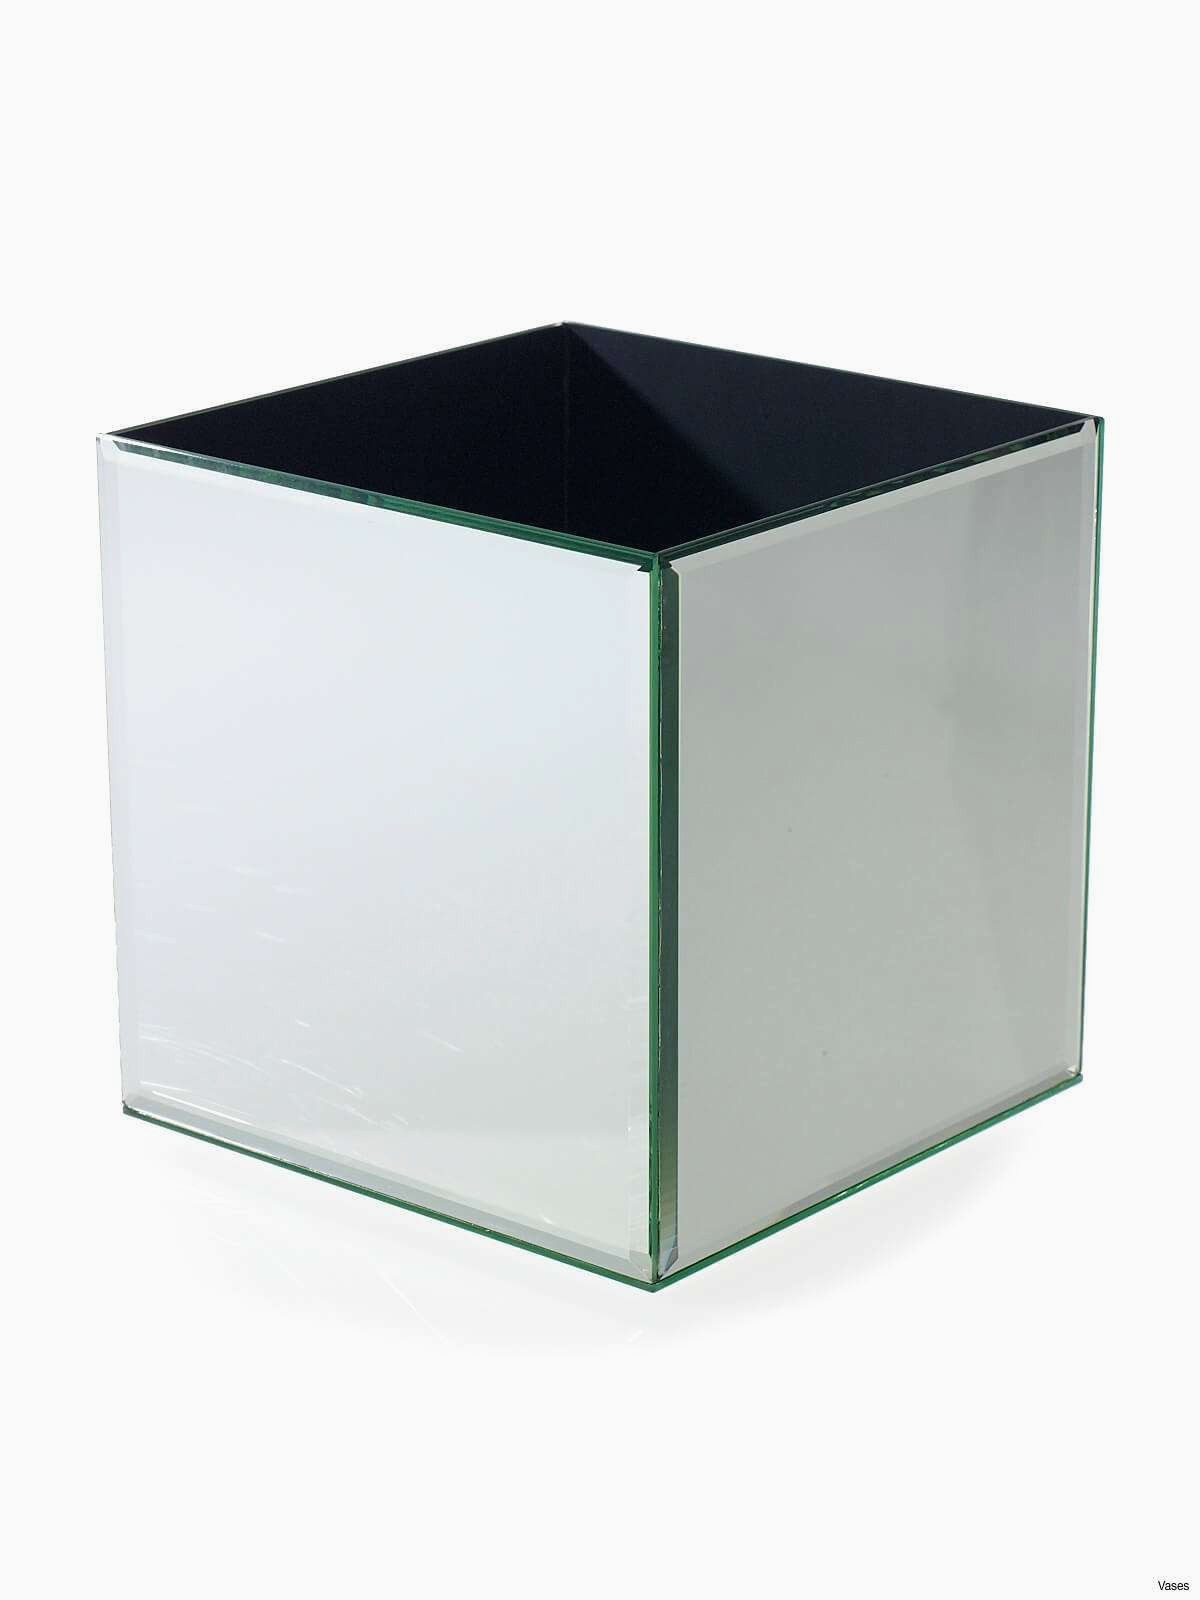 23 Stunning Square Vase Stand 2024 free download square vase stand of 19 detail square glass top coffee table stampler in stand and play table inspirational home decorating with inspiration mirrored square vase 3h vases mirror weddings